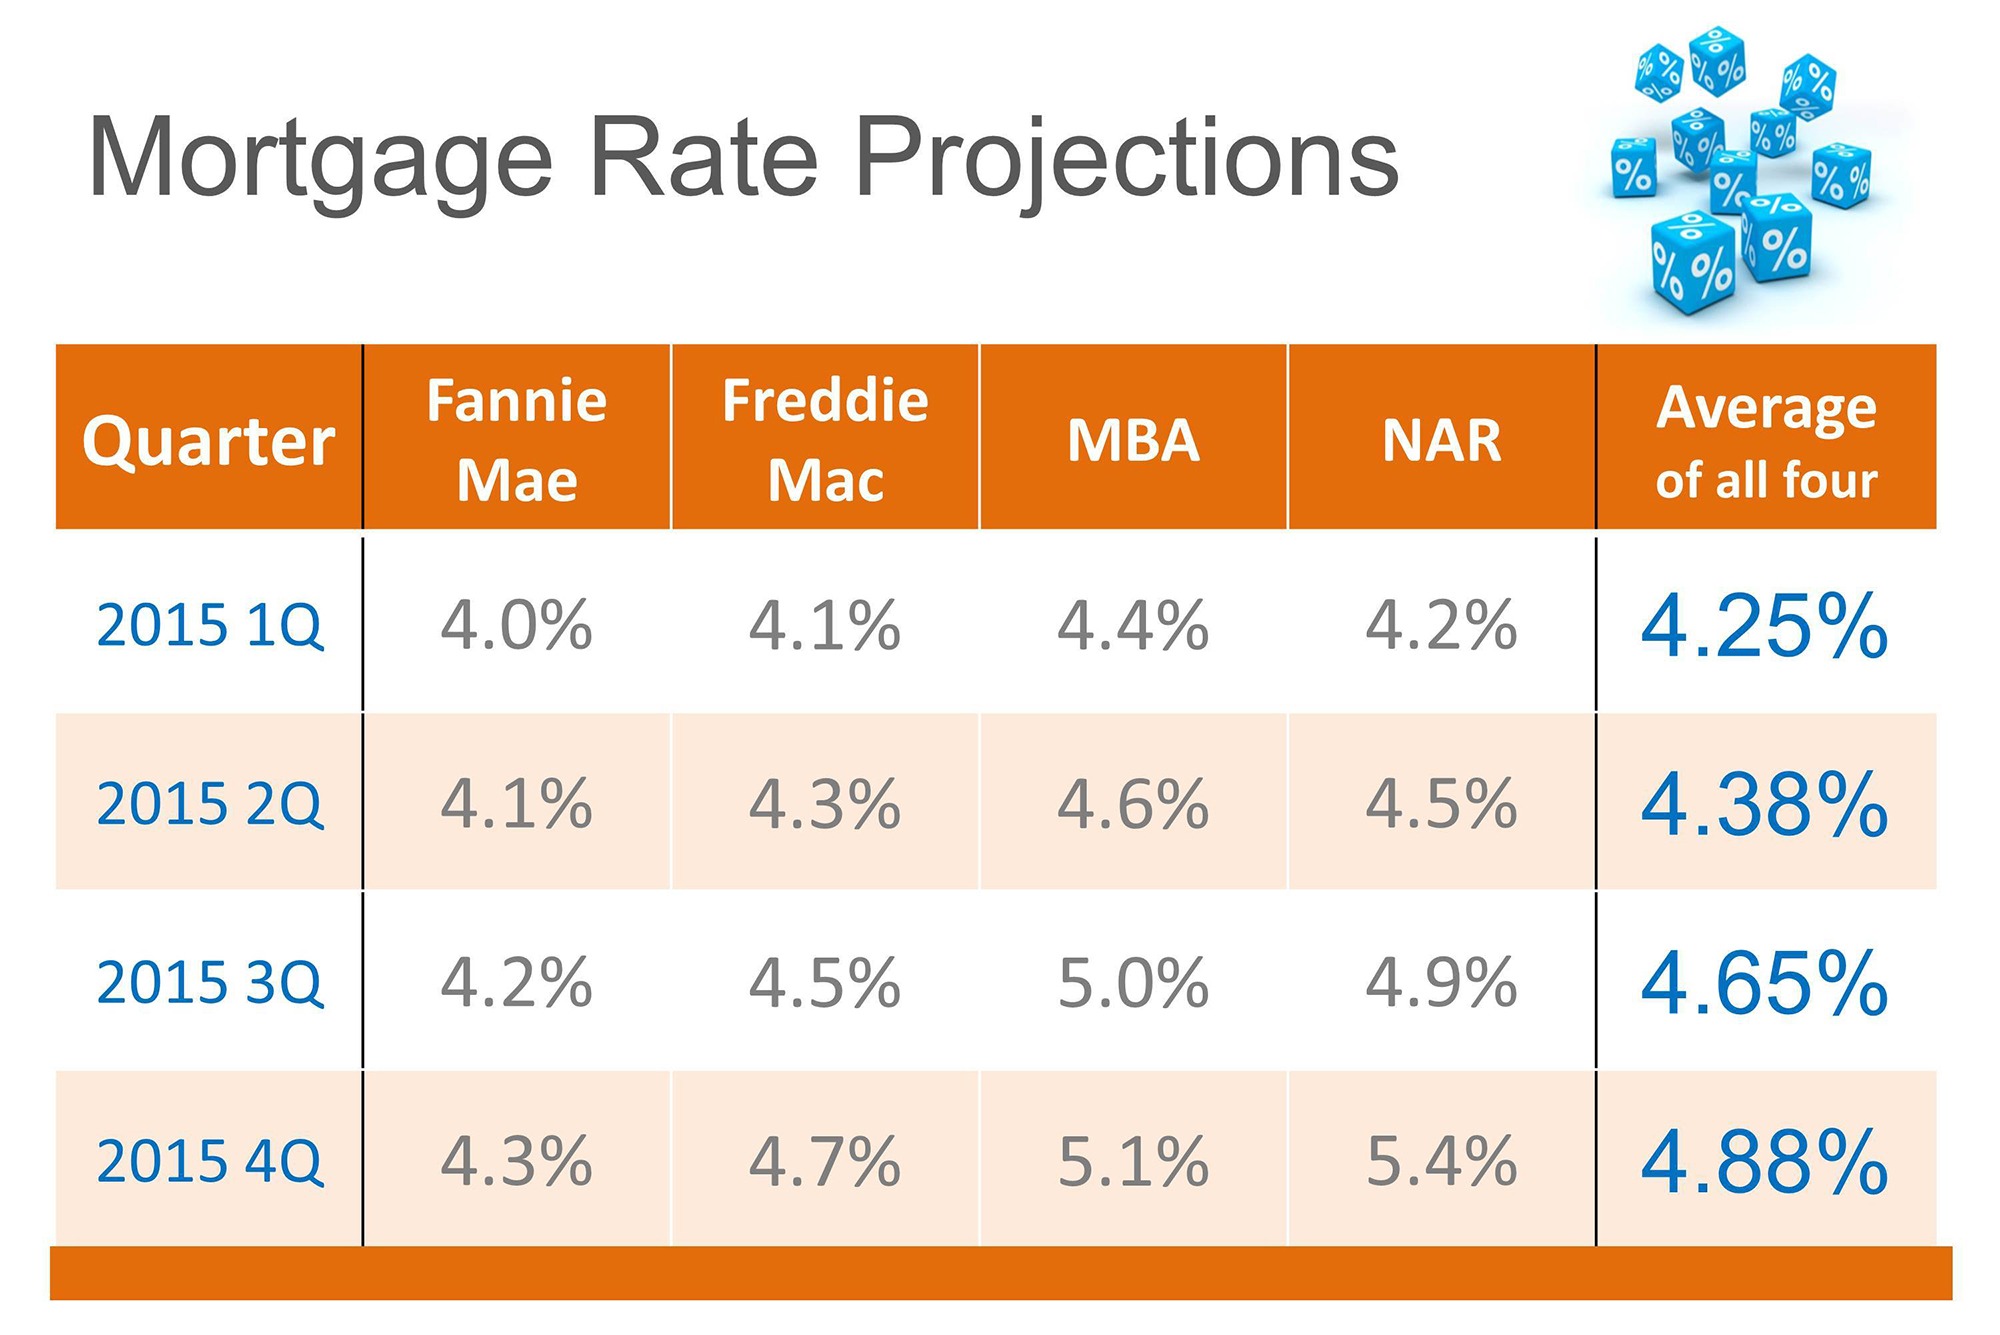 Mortgage Rate Projections